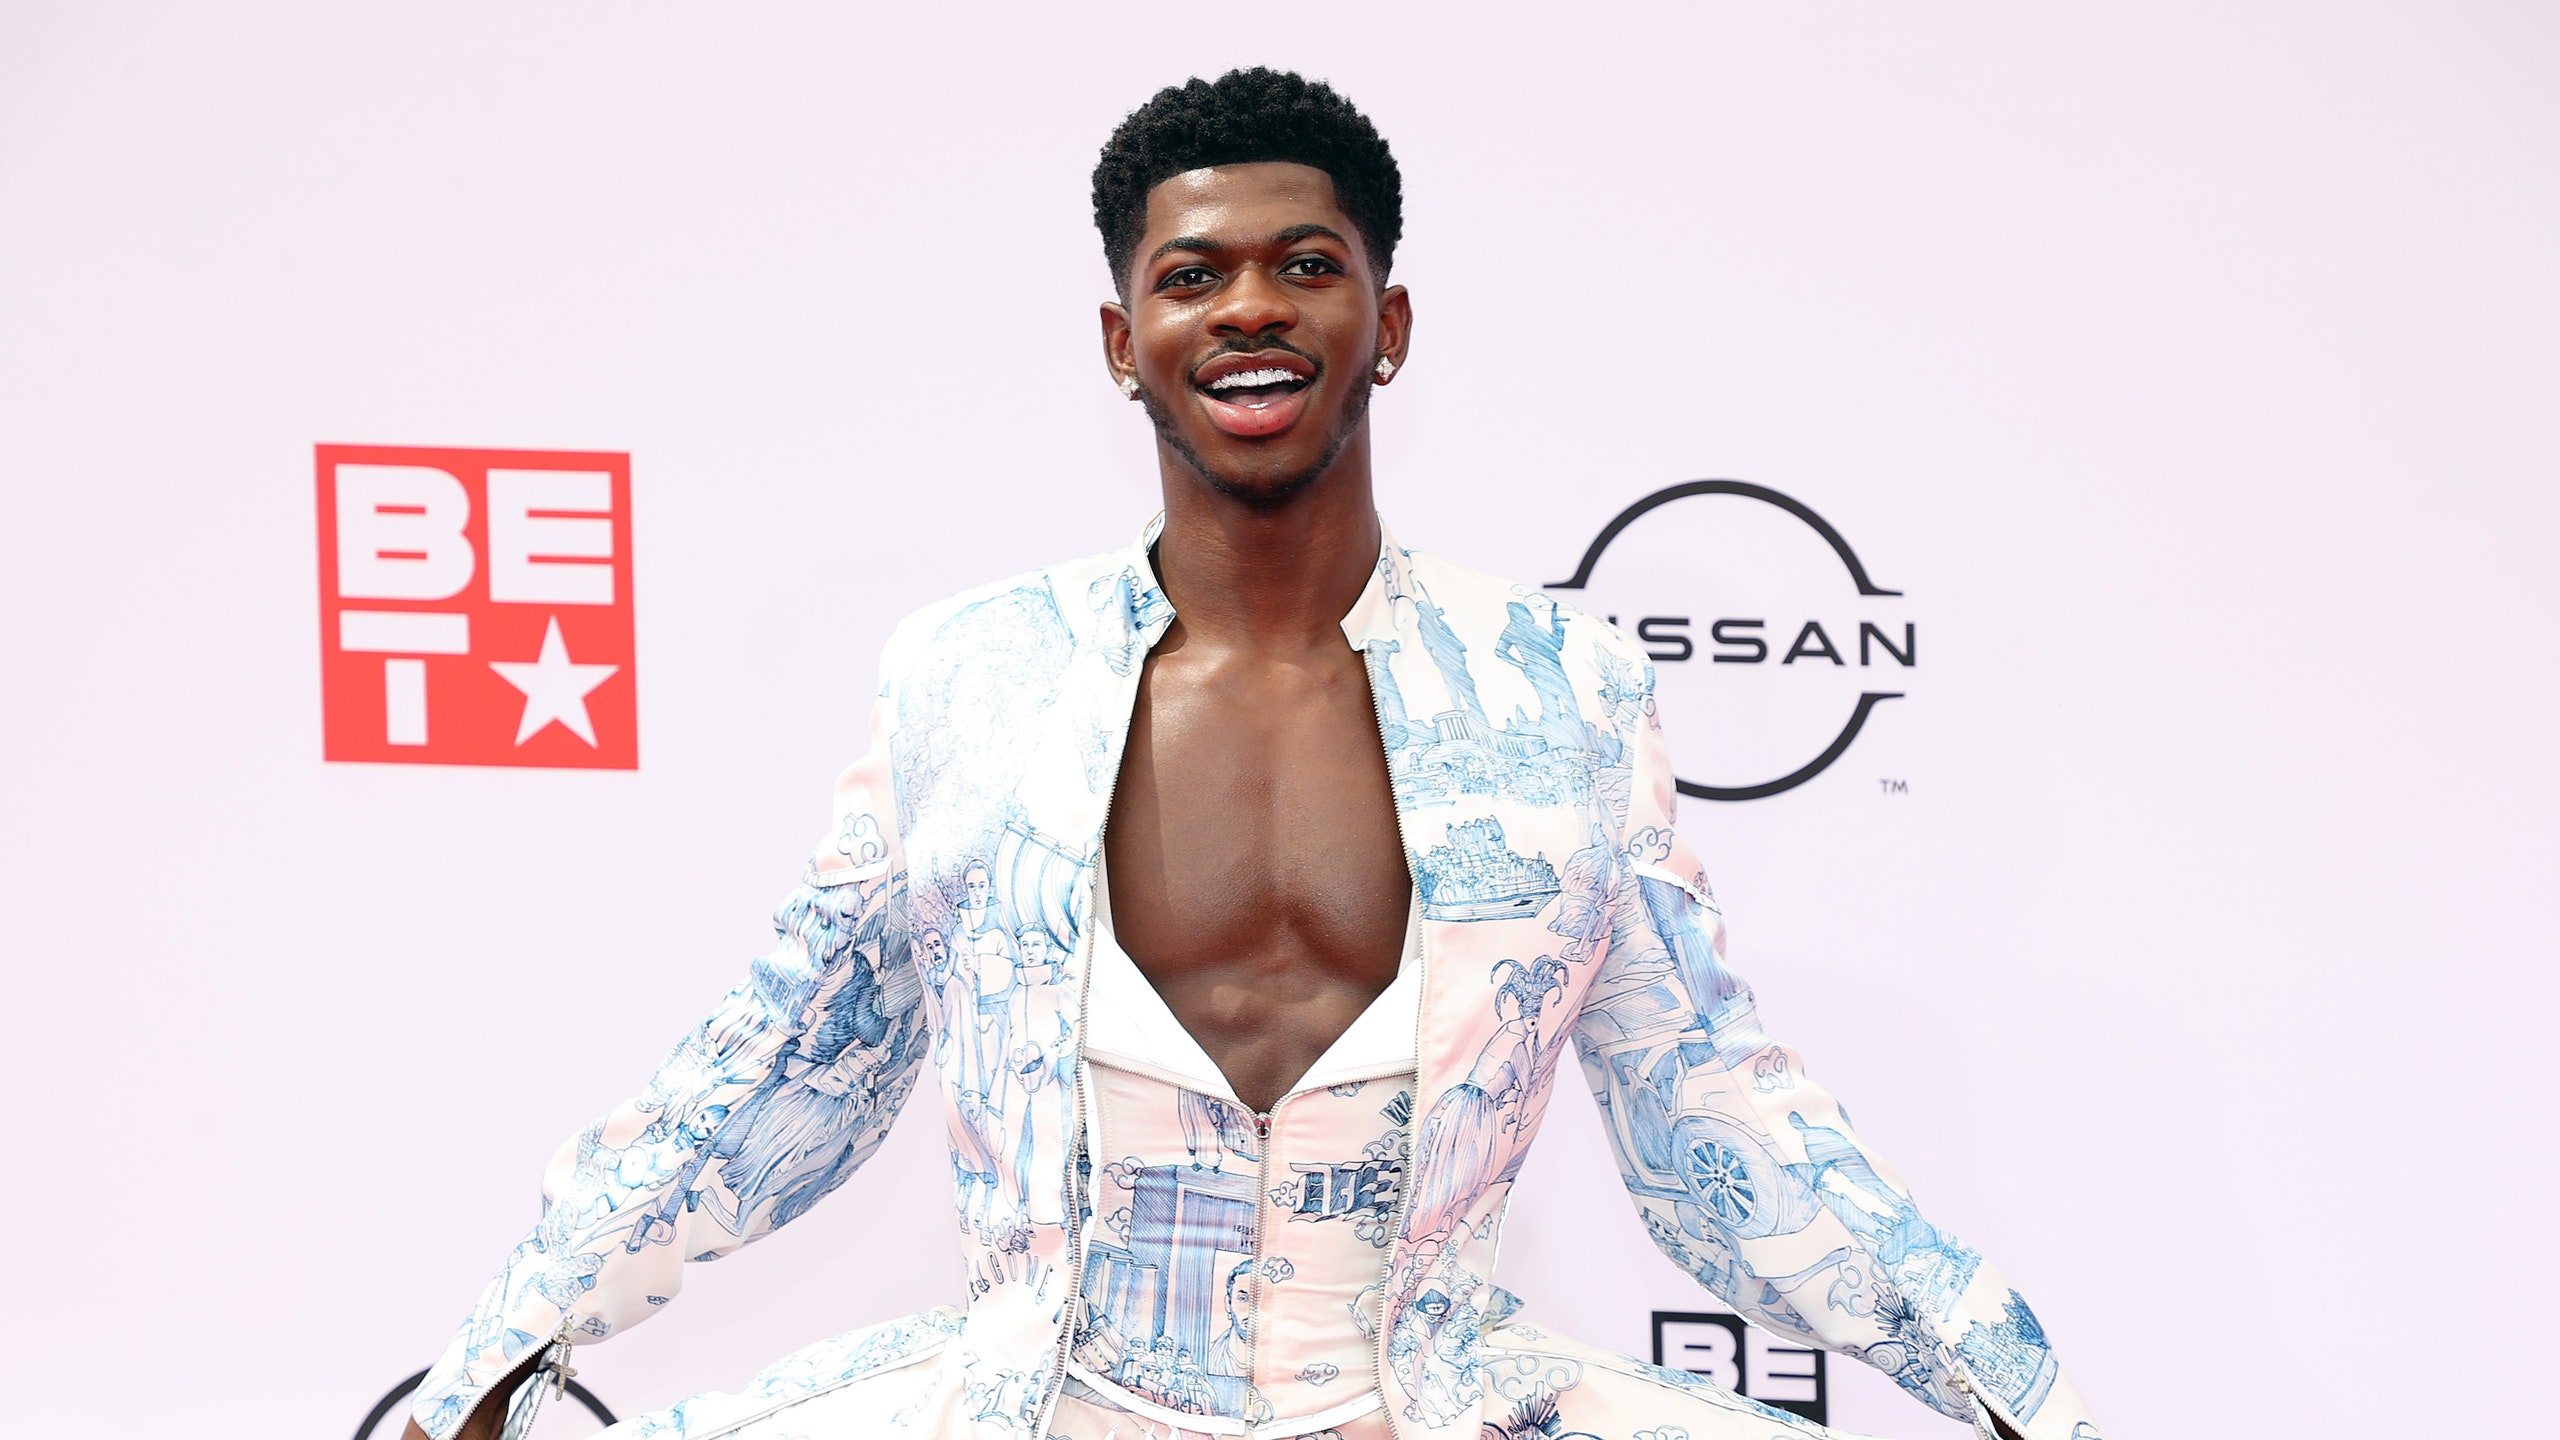 Lil Nas X on how his gospel singer dad inspired him to pursue music